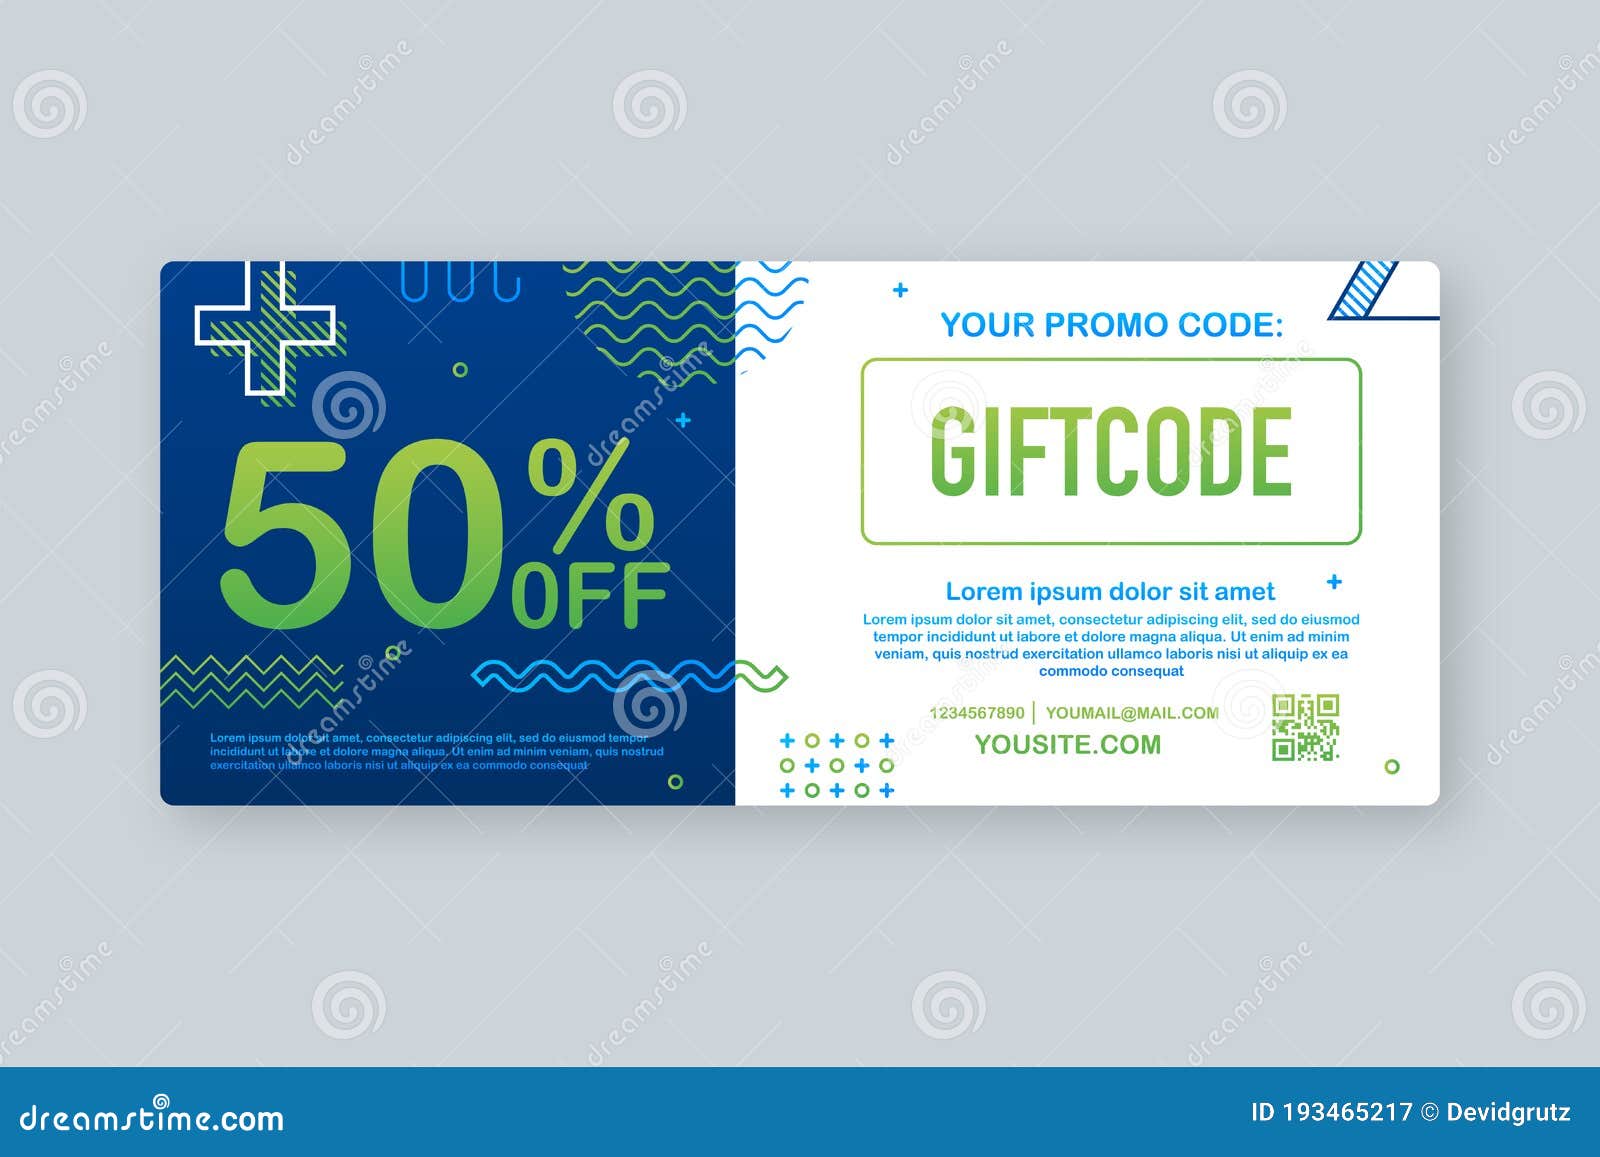 Promo Code. Vector Gift Voucher with Coupon Code. Premium EGift Card Background for E-commerce, Online Shopping Stock Vector - Illustration of background, concept: 193465217